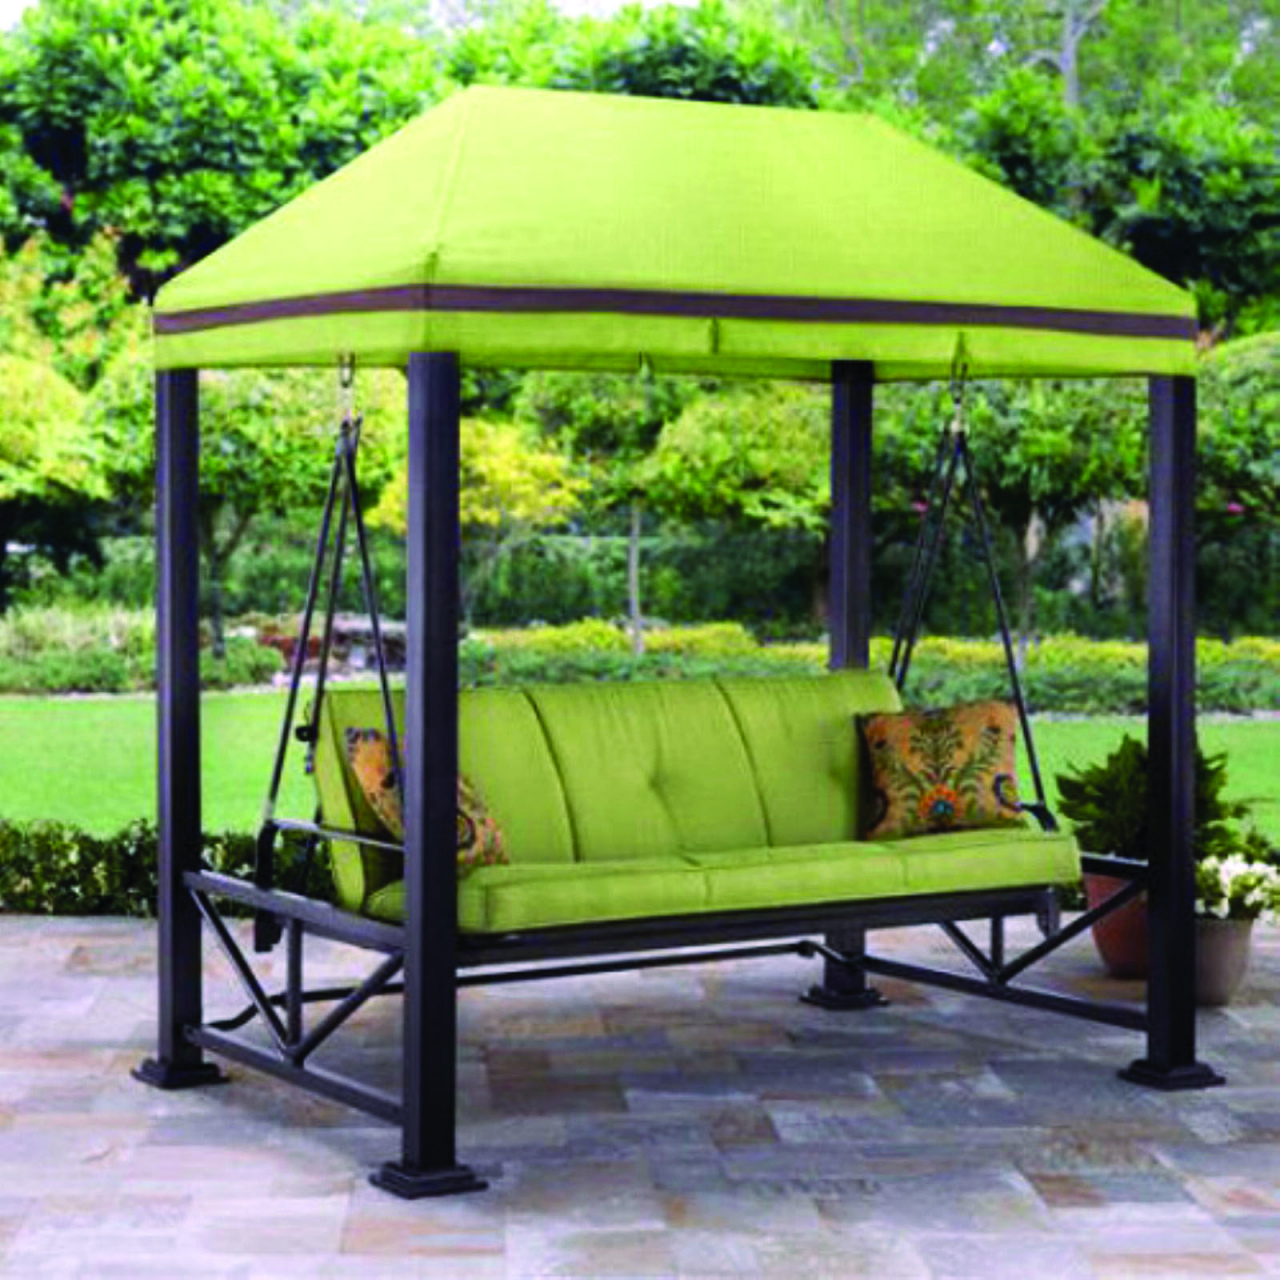 gazebo plans with fireplace 25 rotundas to make your patio area a social location durch gazebo plans with fireplace